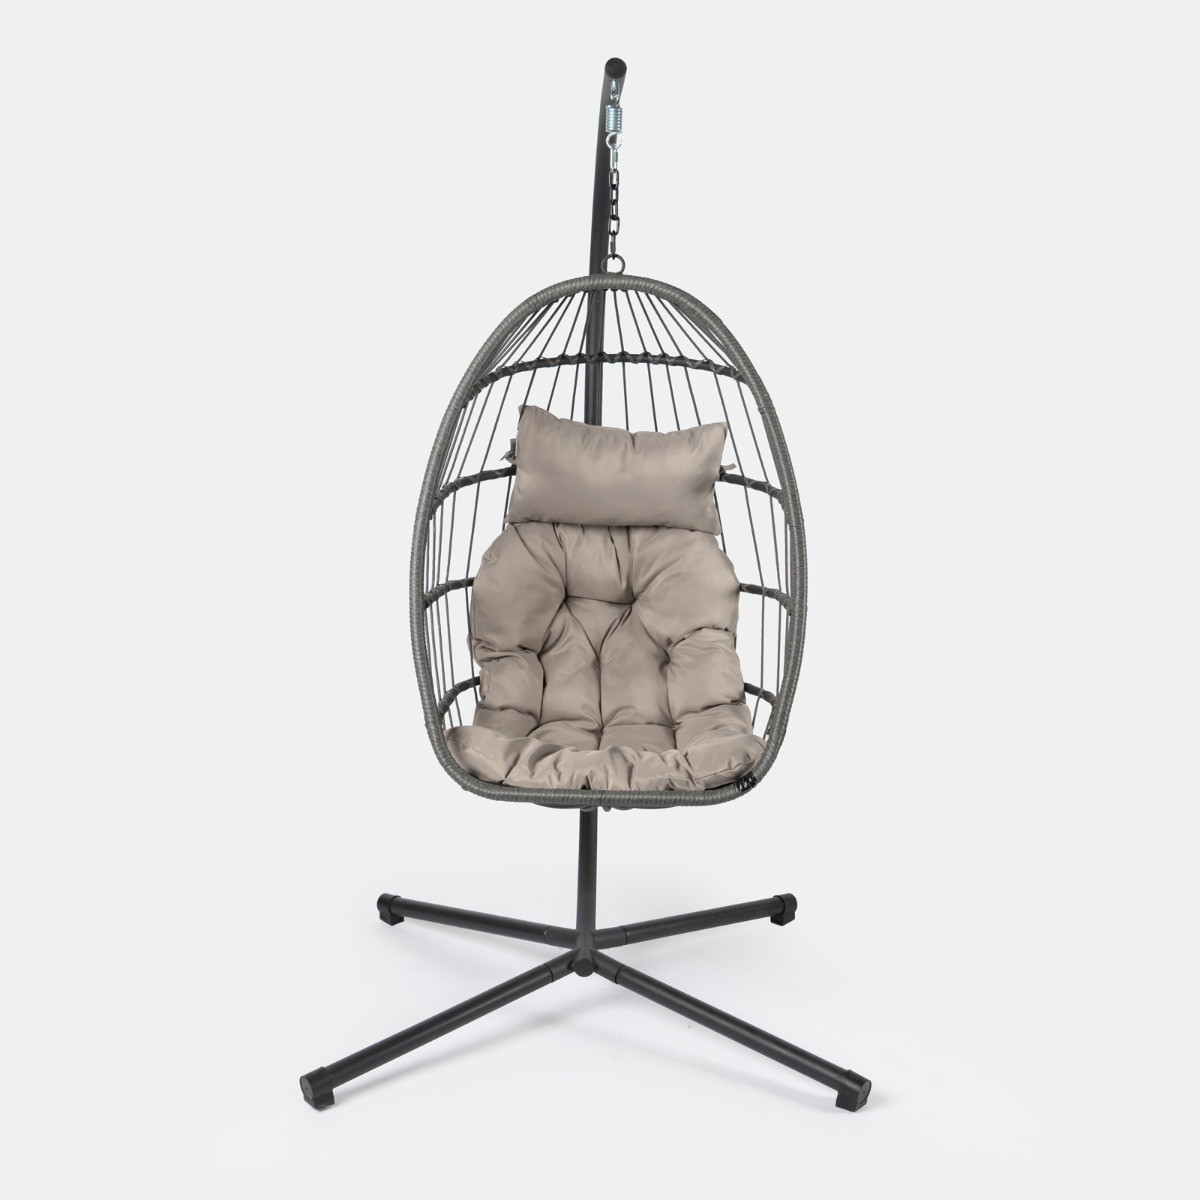 OHS Foldable Hanging Egg Chair - Grey>